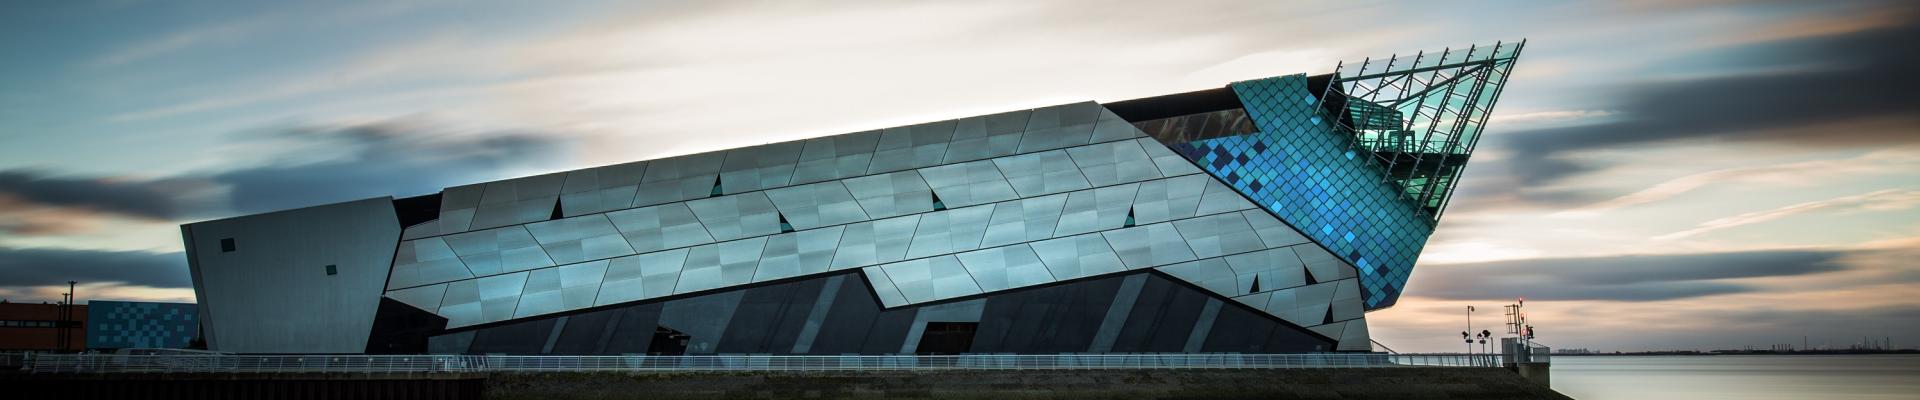 The Deep building exterior overlooking the Humber Estuary at dusk.